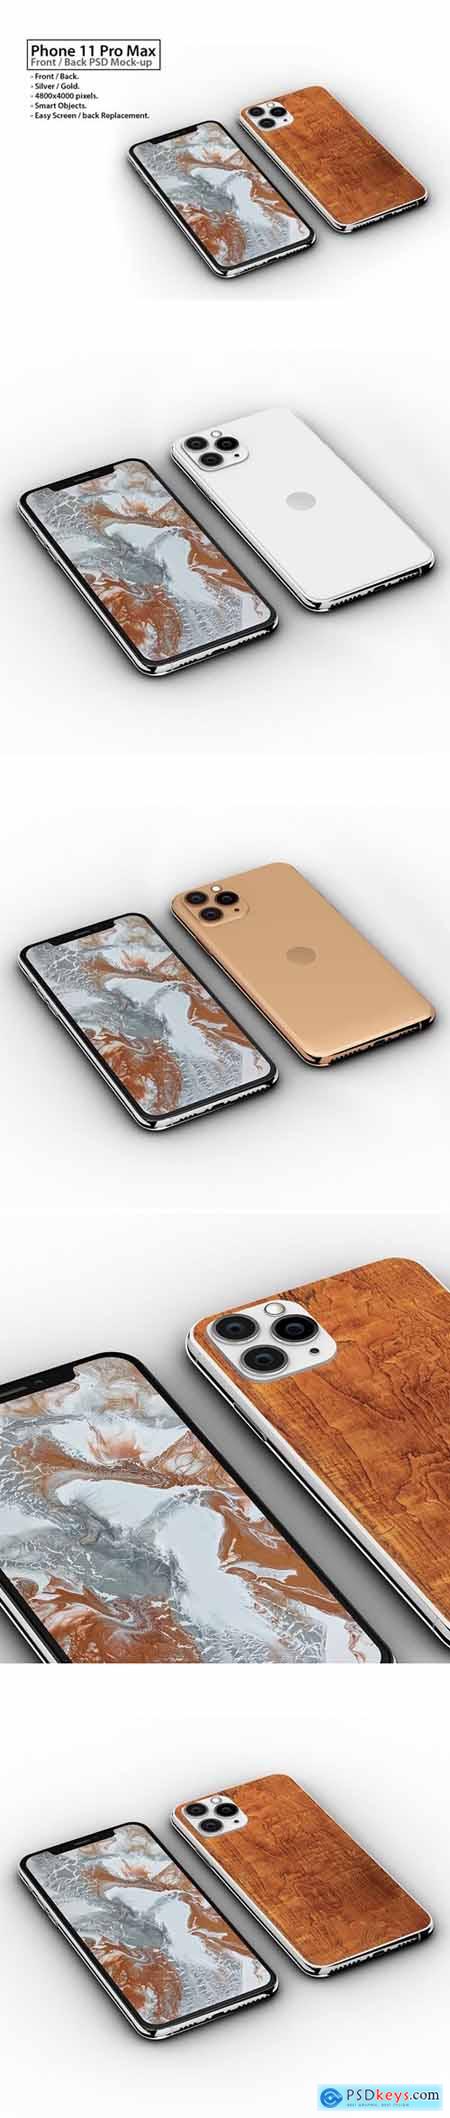 Tabled Phone 11 Front & Back PSD Mock-up